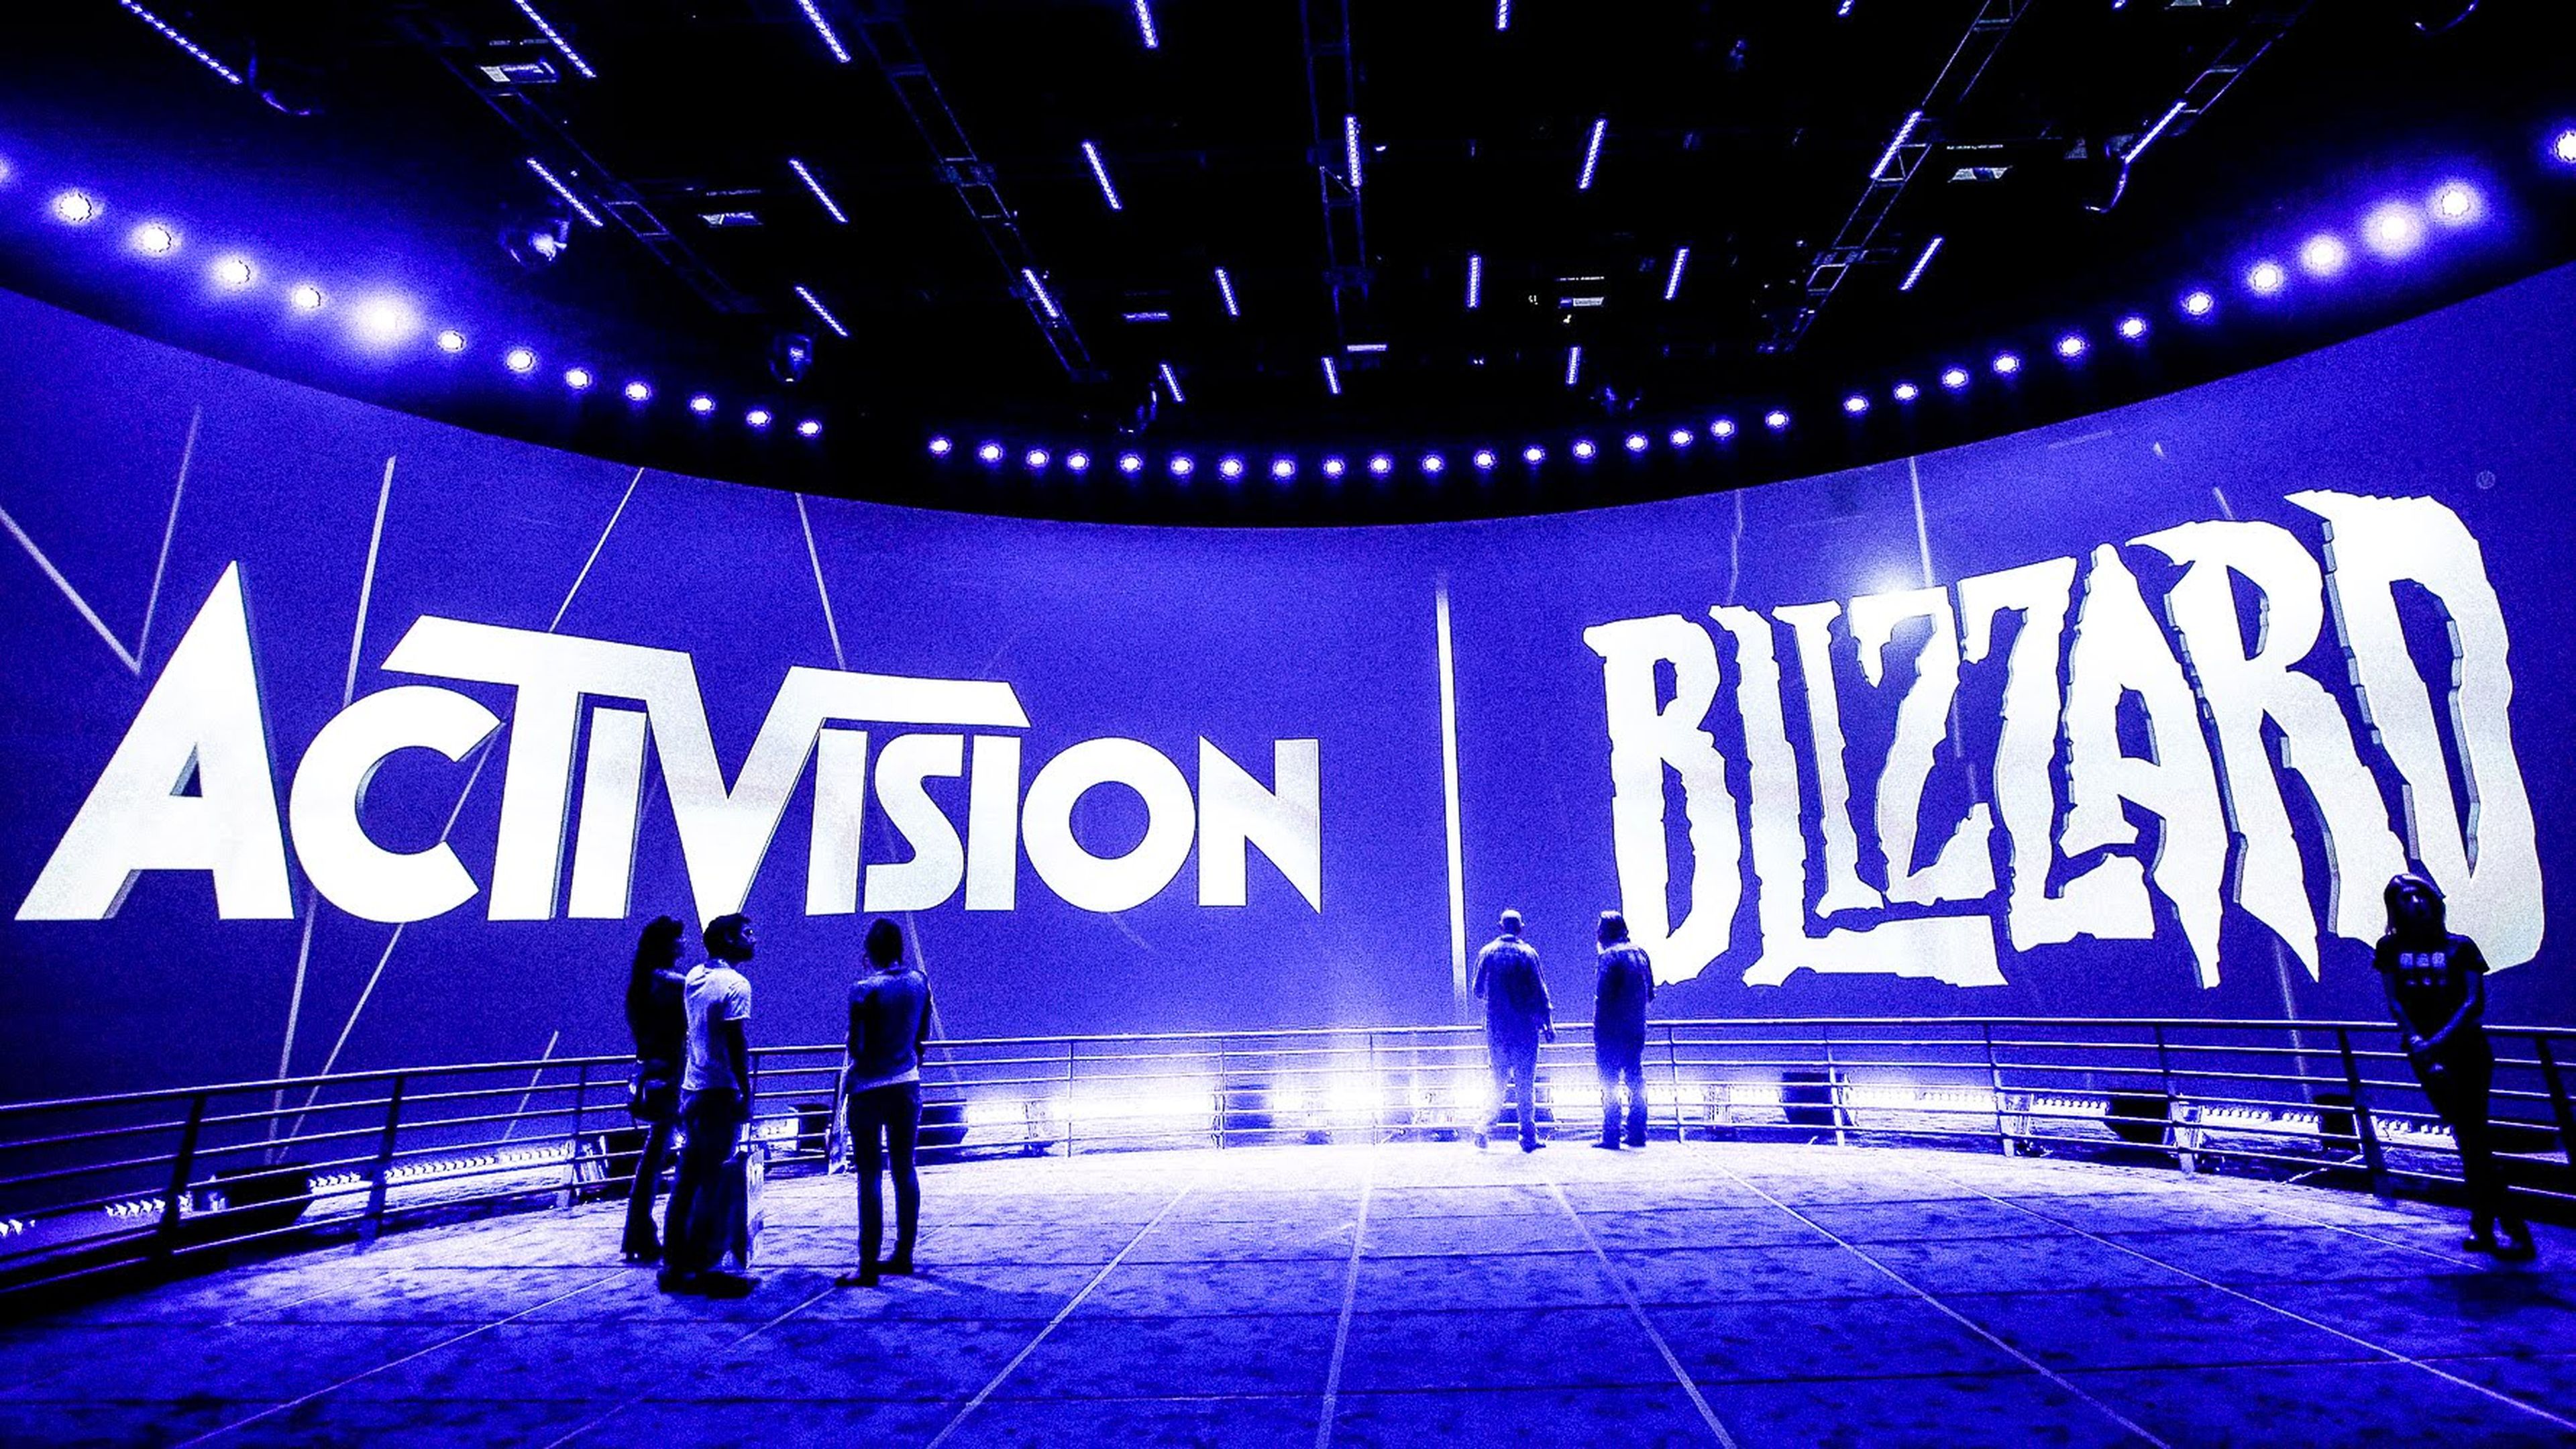 Microsoft focuses its purchase of Activision Blizzard on the mobile market.